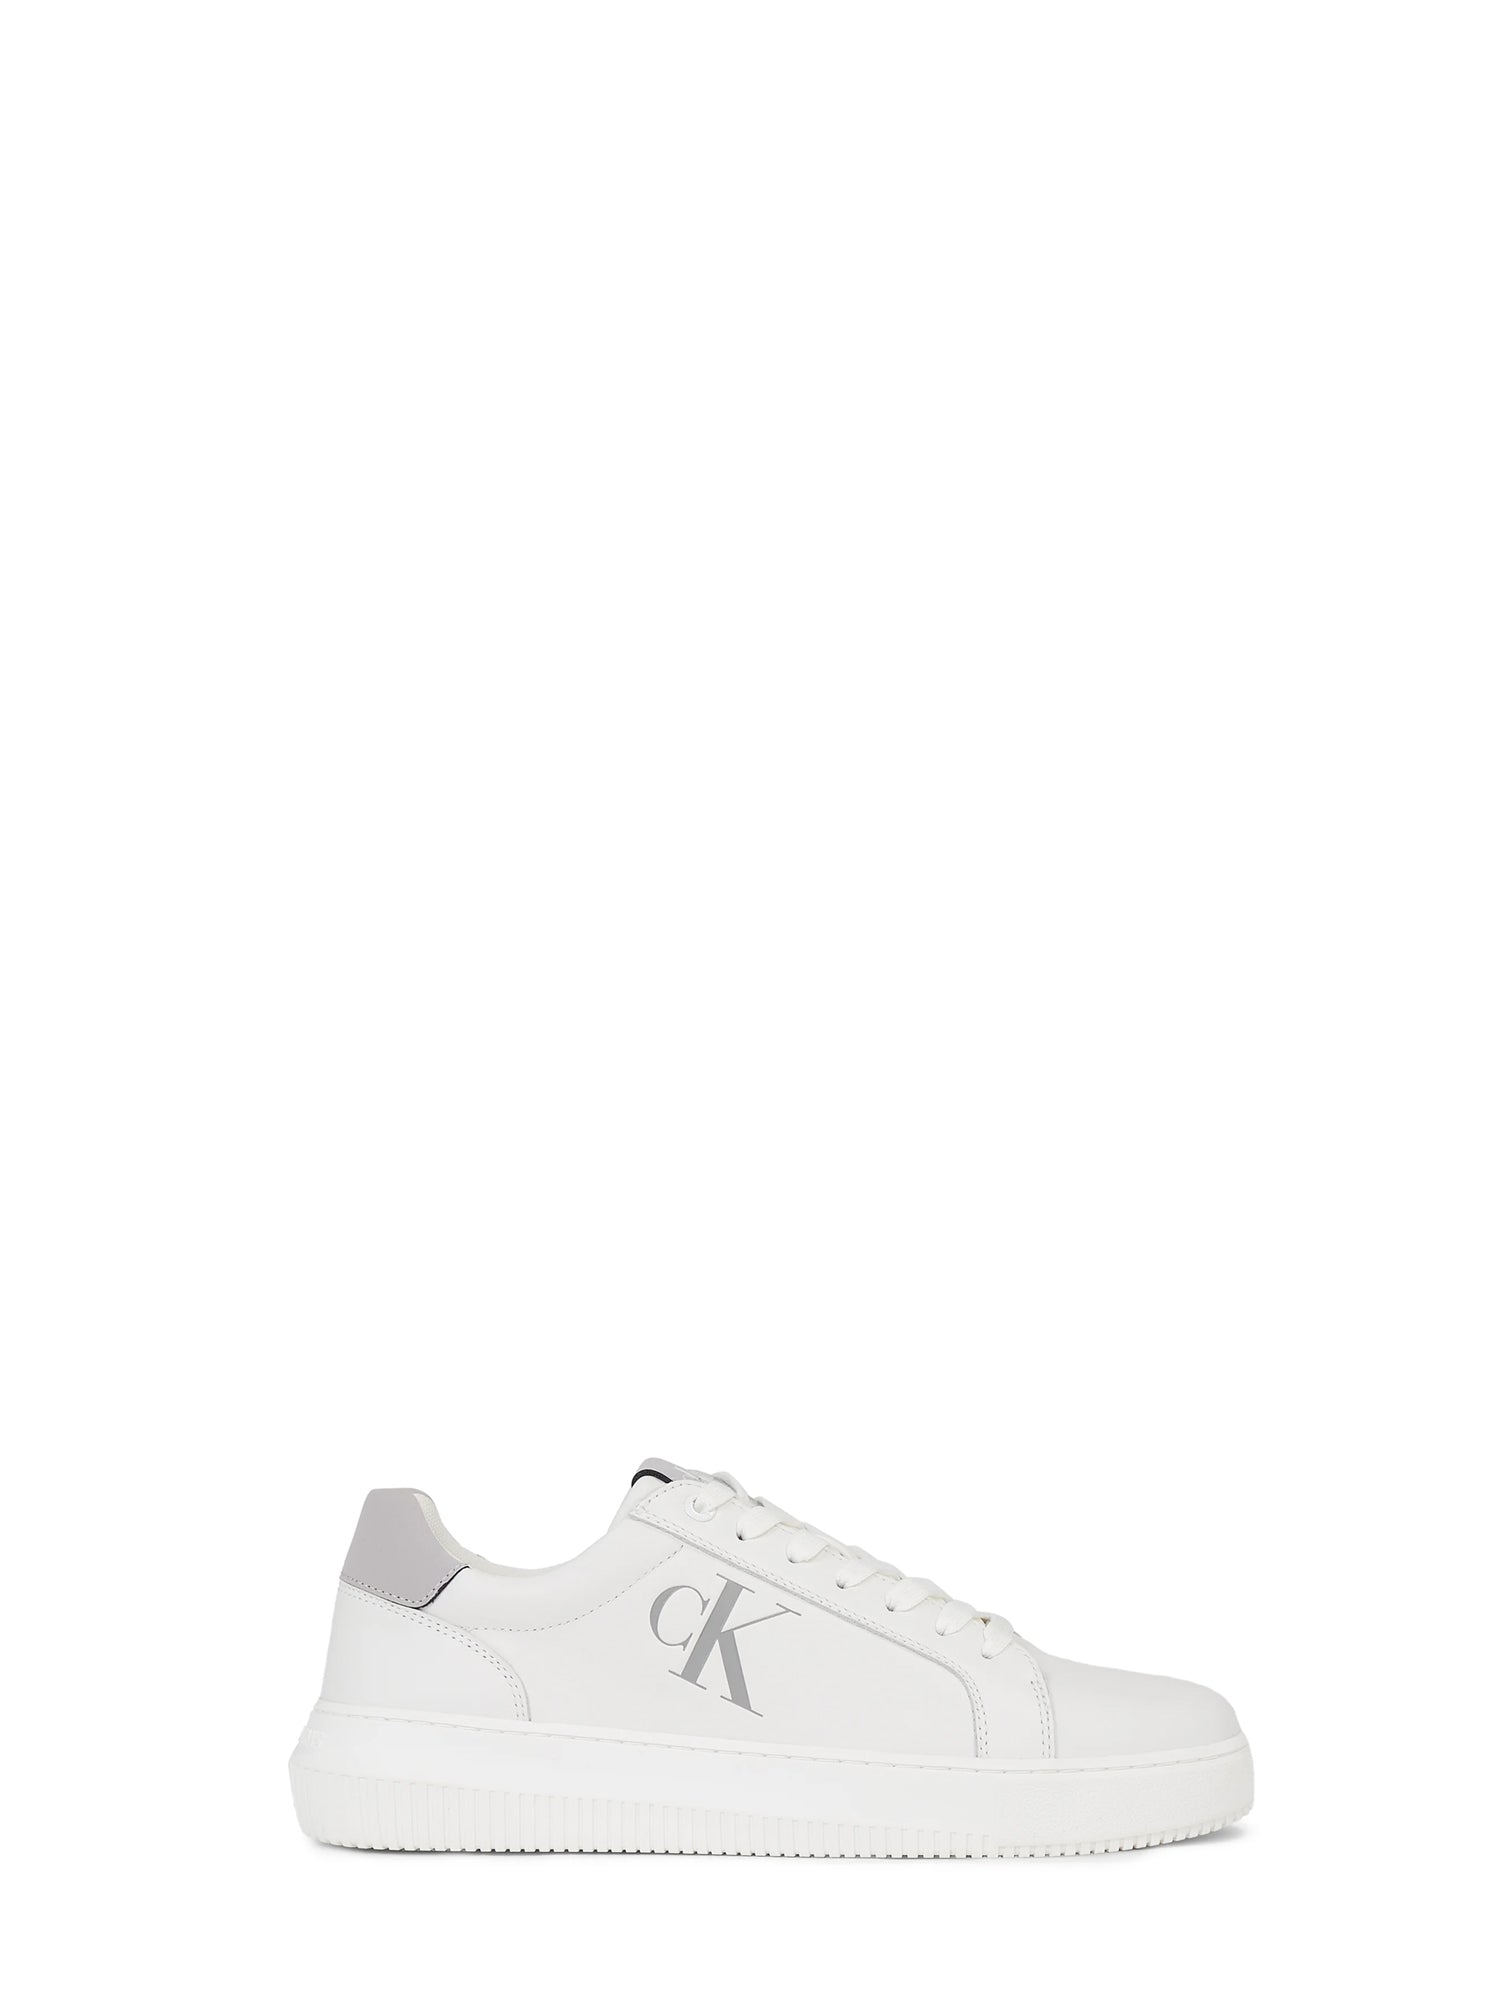 CALVIN KLEIN SHOES SNEAKERS BASSE CHUNKY CUPSOLE BIANCO